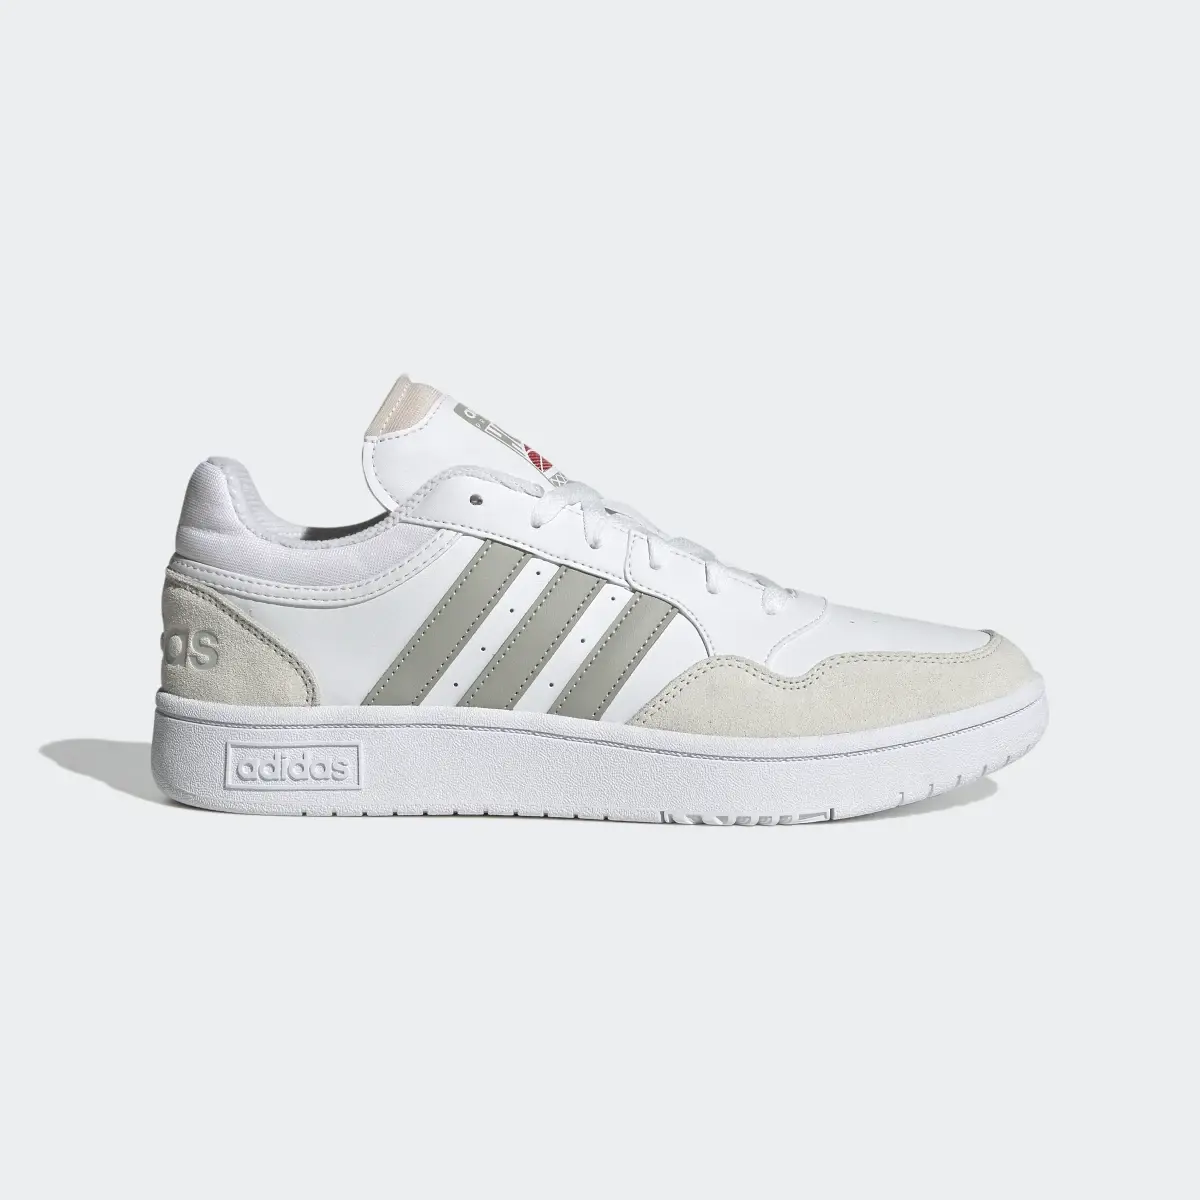 Adidas Hoops 3.0 Lifestyle Basketball Low Classic Vintage Schuh. 2